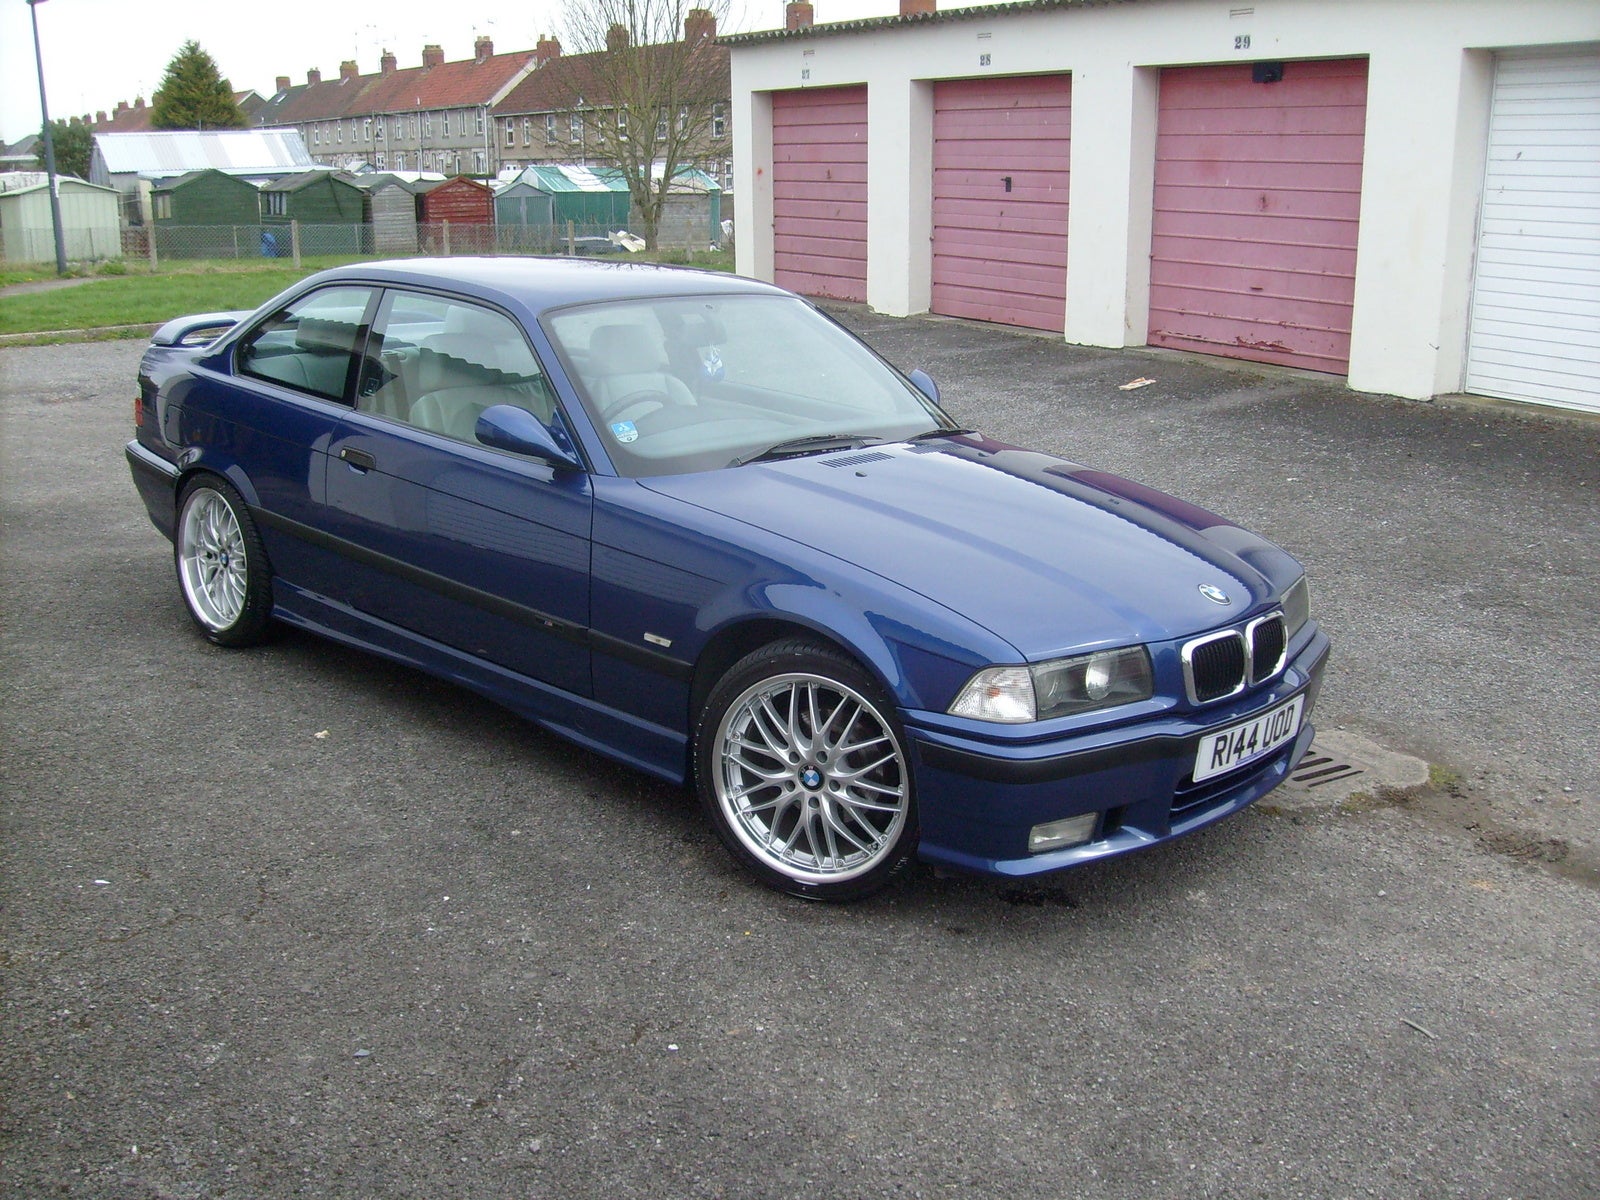 1998 Bmw 323is coupe reviews #5